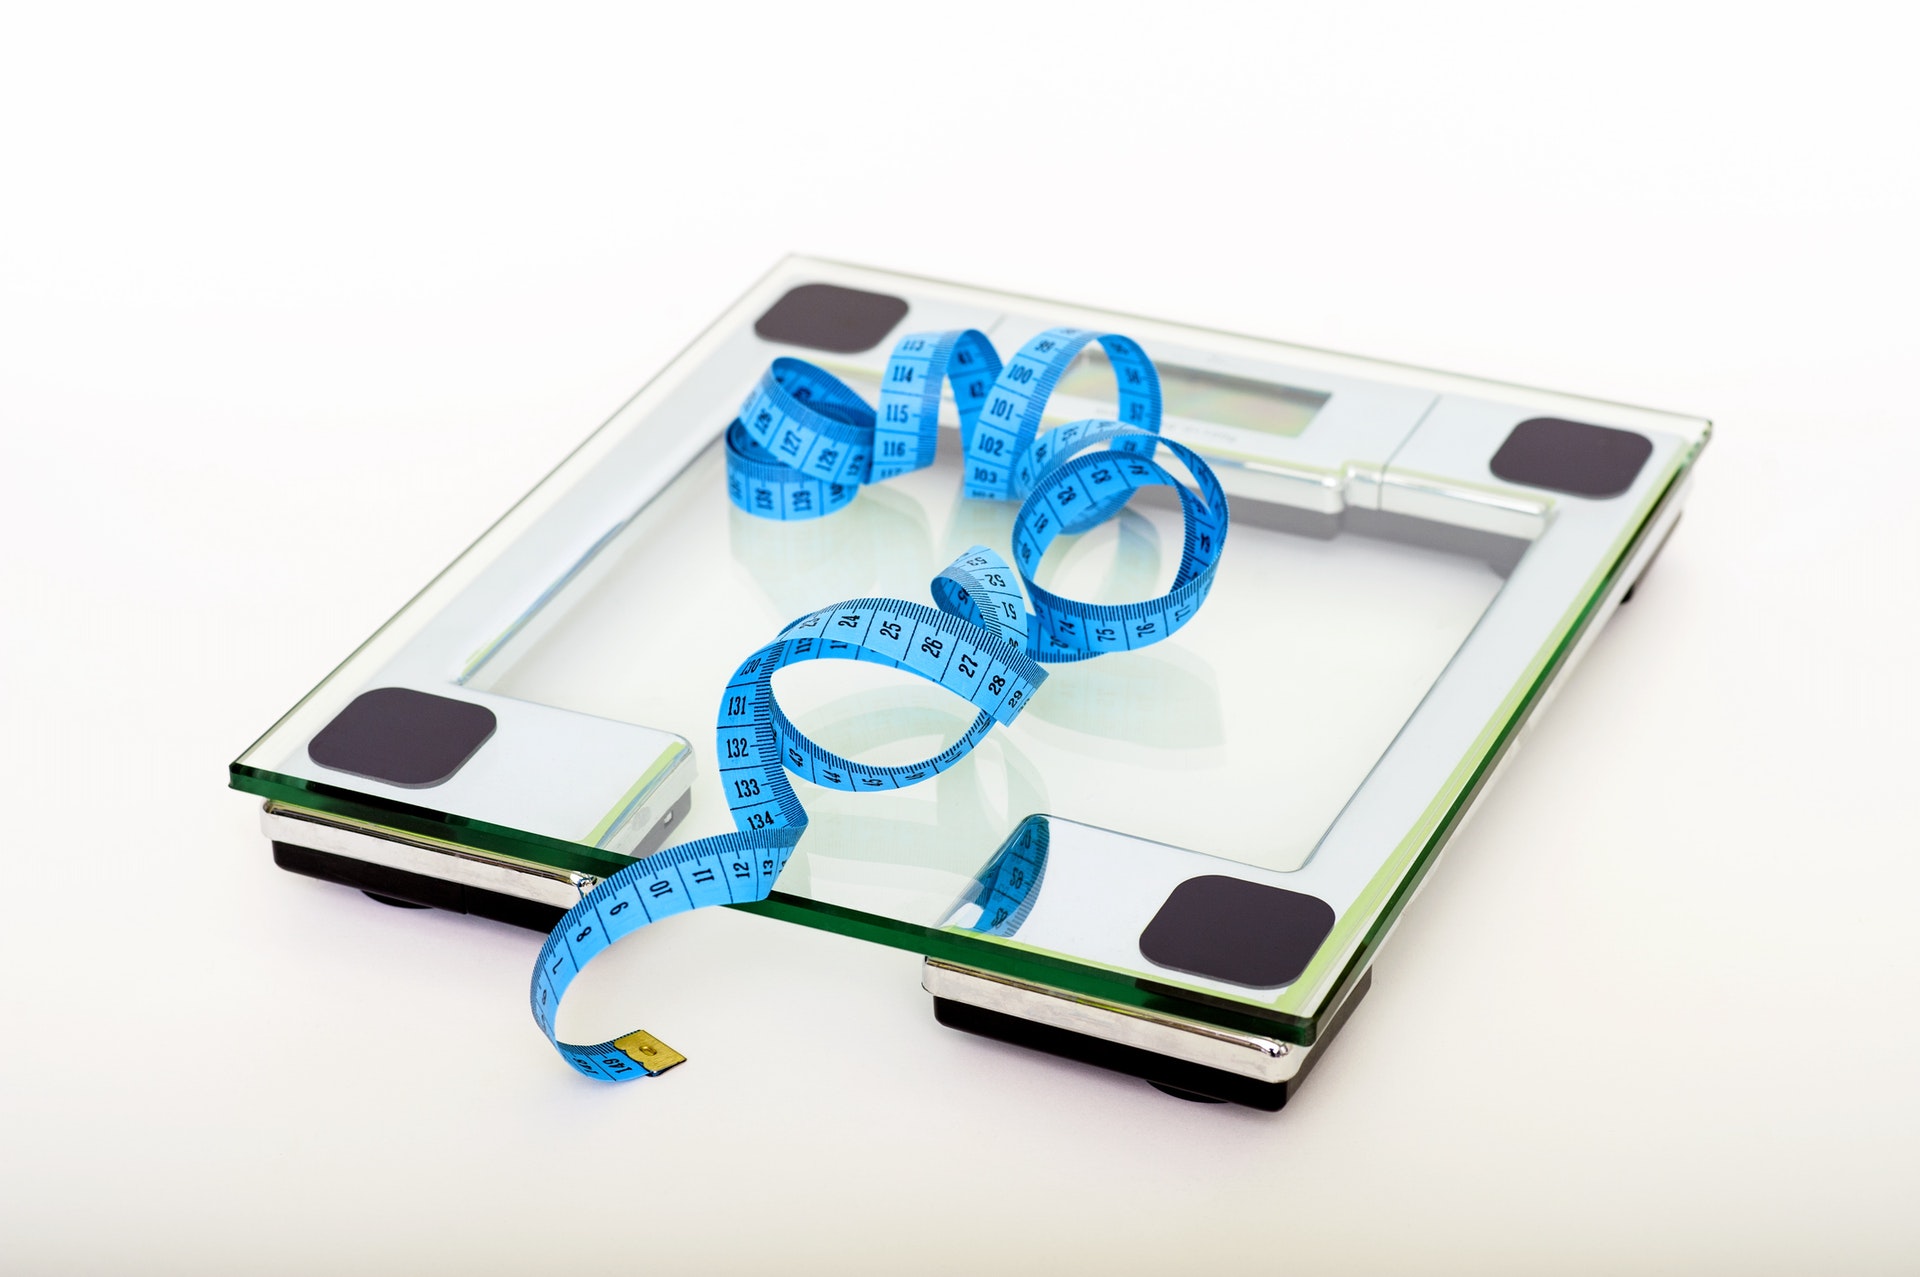 blue-tape-measuring-on-clear-glass-square-weighing-scale-53404.jpg